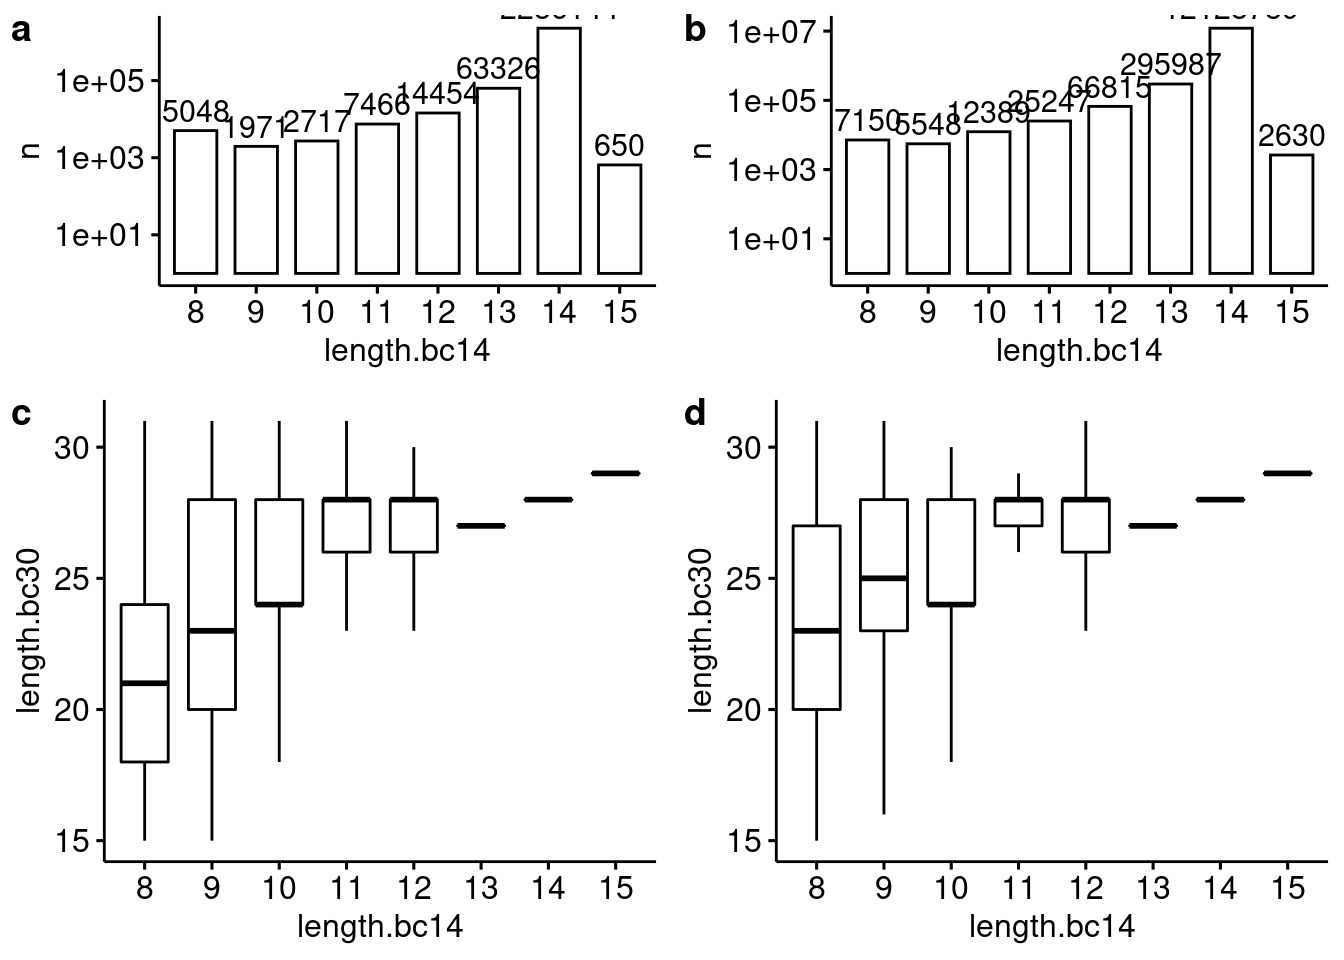 Relationship between blastn alignment length for the 14 bp and 30 bp lenti barcodes with an evalue <= 0.1 for (a) Capture4 and (b) Capture5.